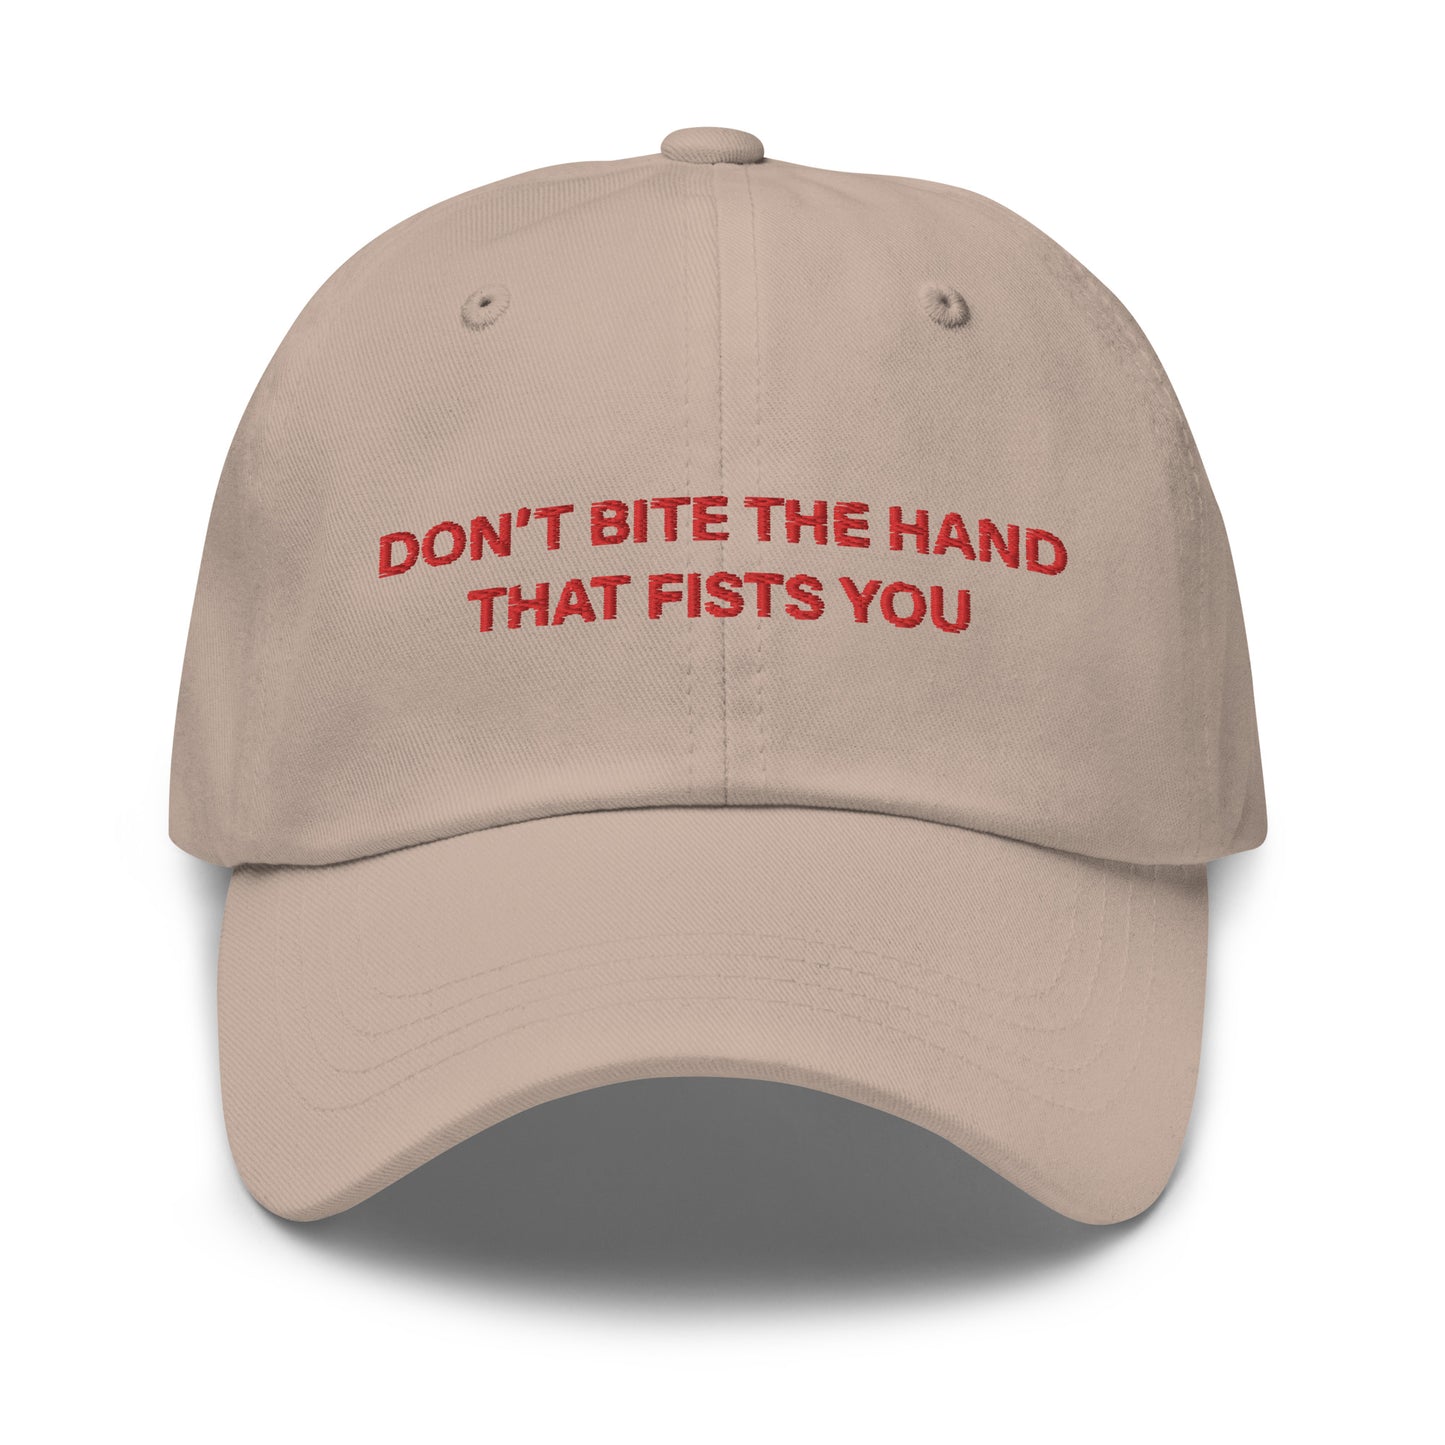 Don't Bite the Hand That Fists You hat